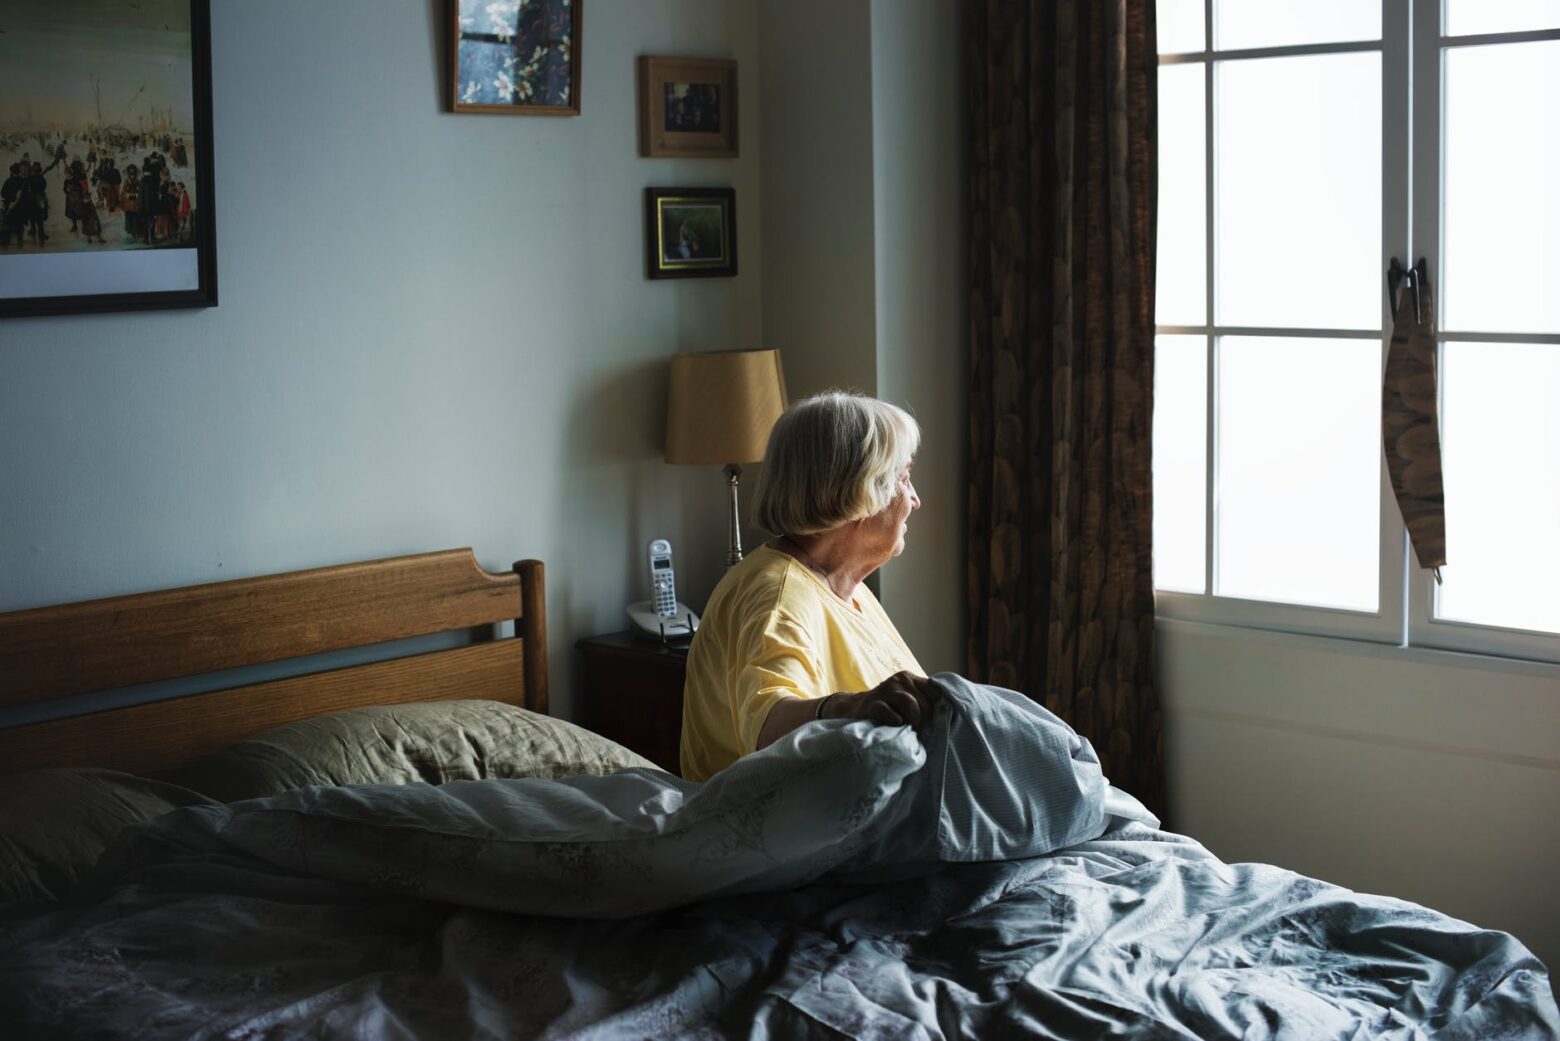 THE IMPORTANCE OF DEMENTIA PATIENTS FOLLOWING ROUTINES